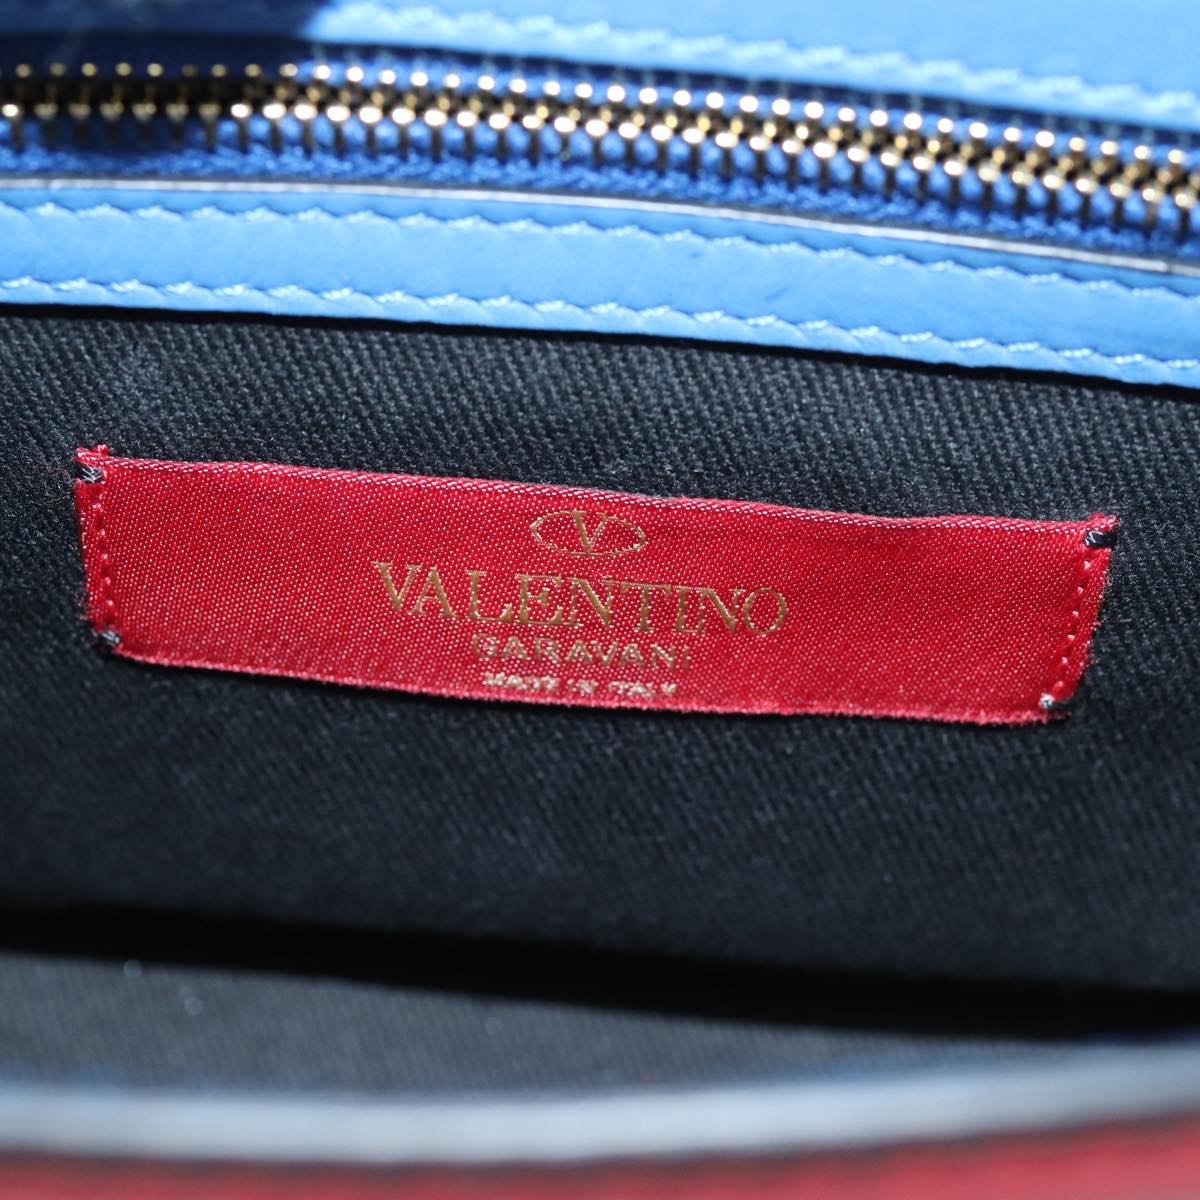 VALENTINO Chain Shoulder Bag Leather Blue Red Auth 73198A